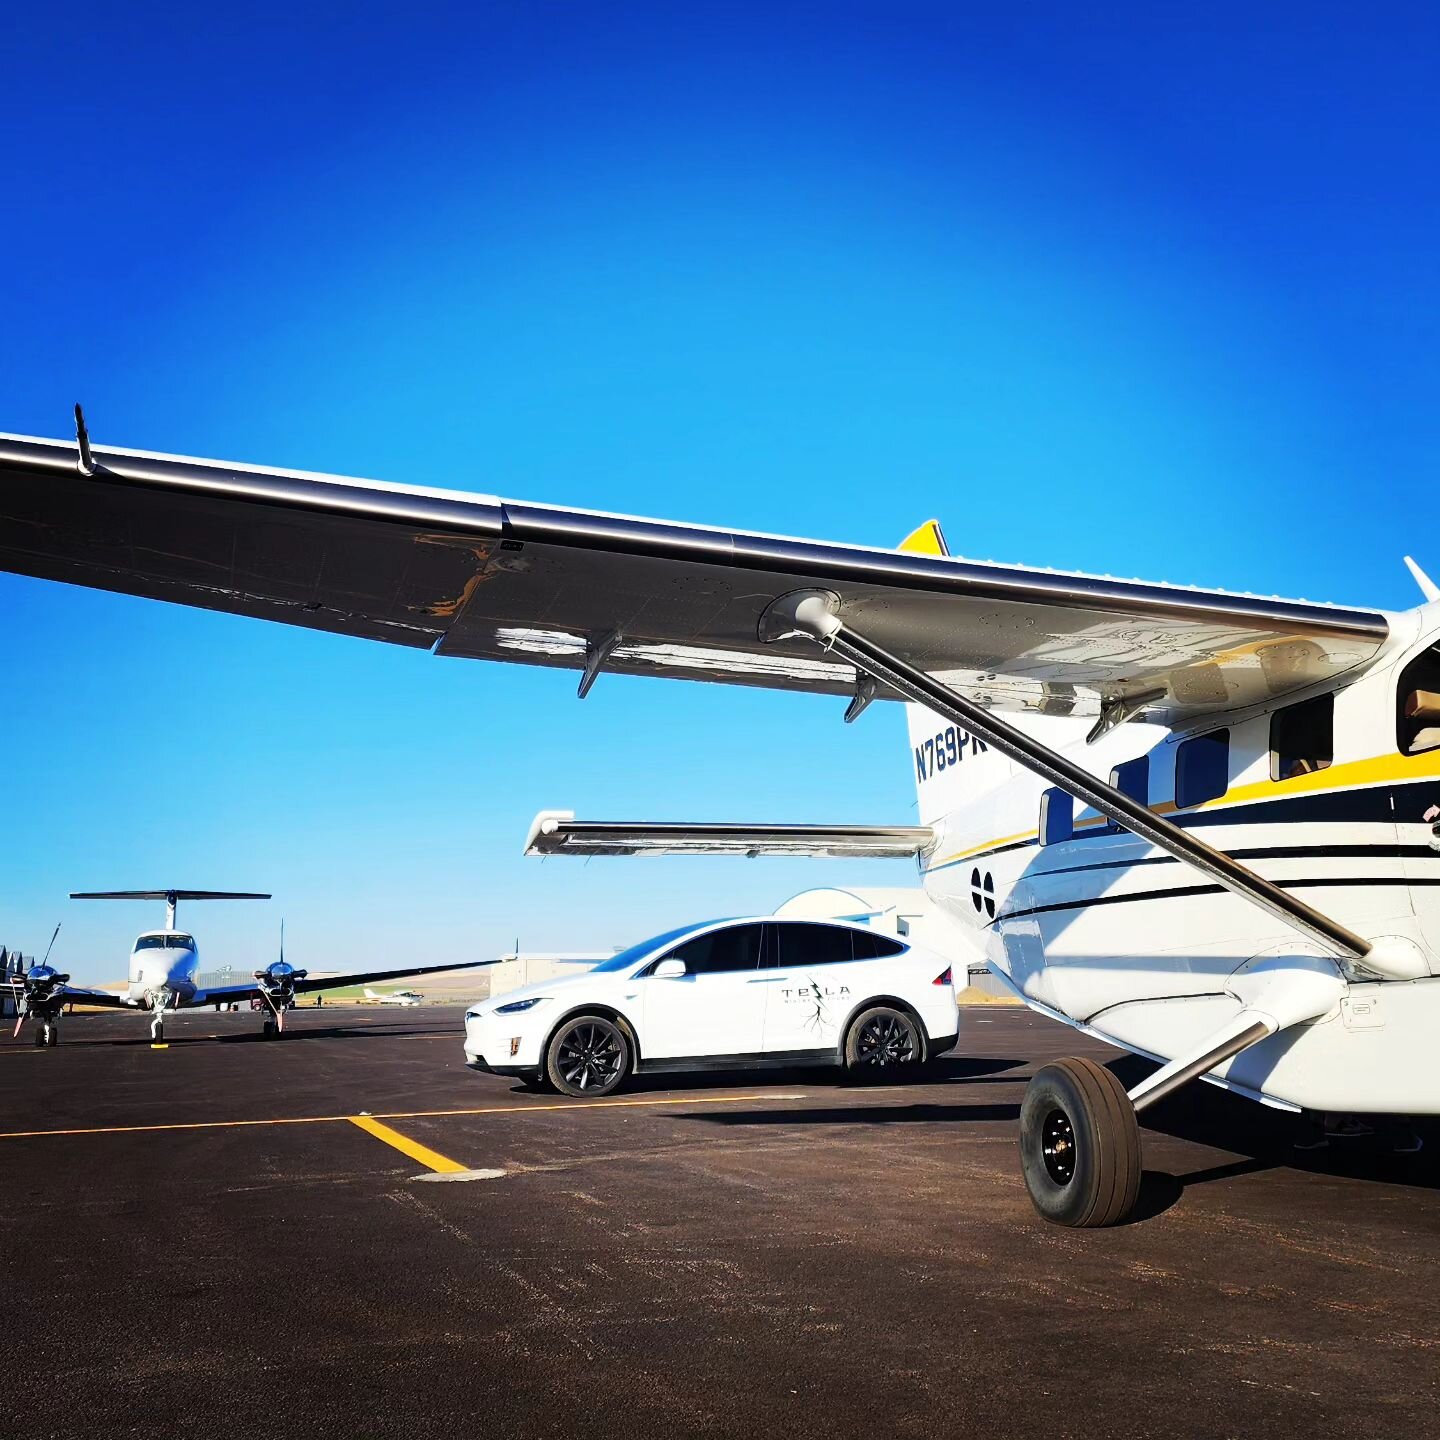 If you're flying into Walla Walla in style, you should tour just the same!

#ALW
#wallawalla 
#rampsidepickup 
#wawine
#pnwadventures 
#teslawinerytours